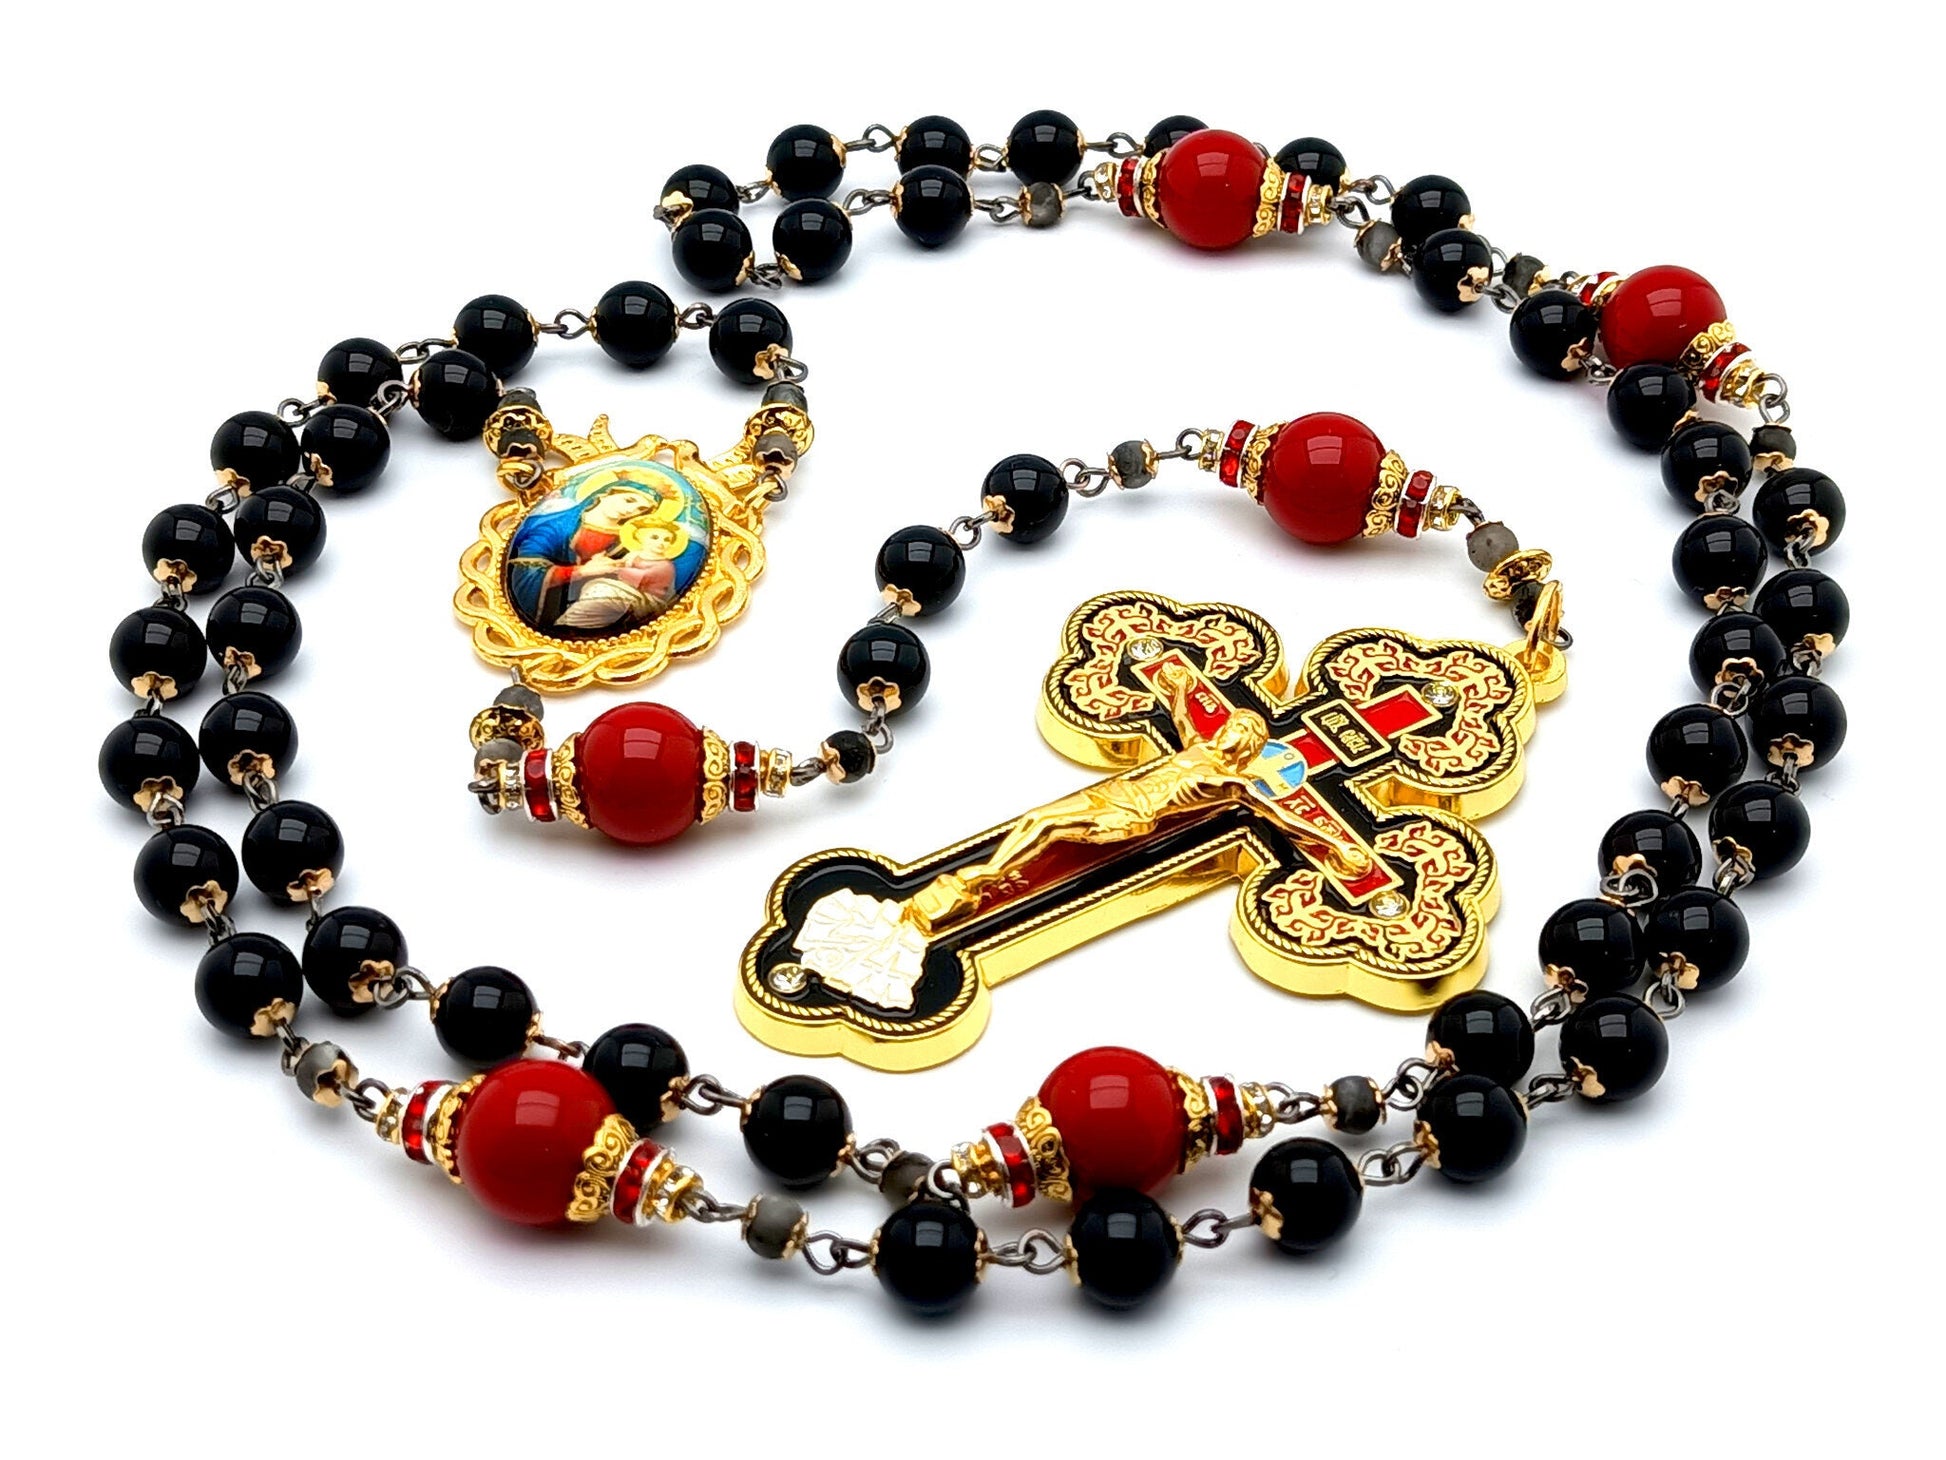 Our Lady of Perpetual Help unique rosary beads with onyx and red gemstone beads, ornate enamel crucifix and golden picture centre medal.